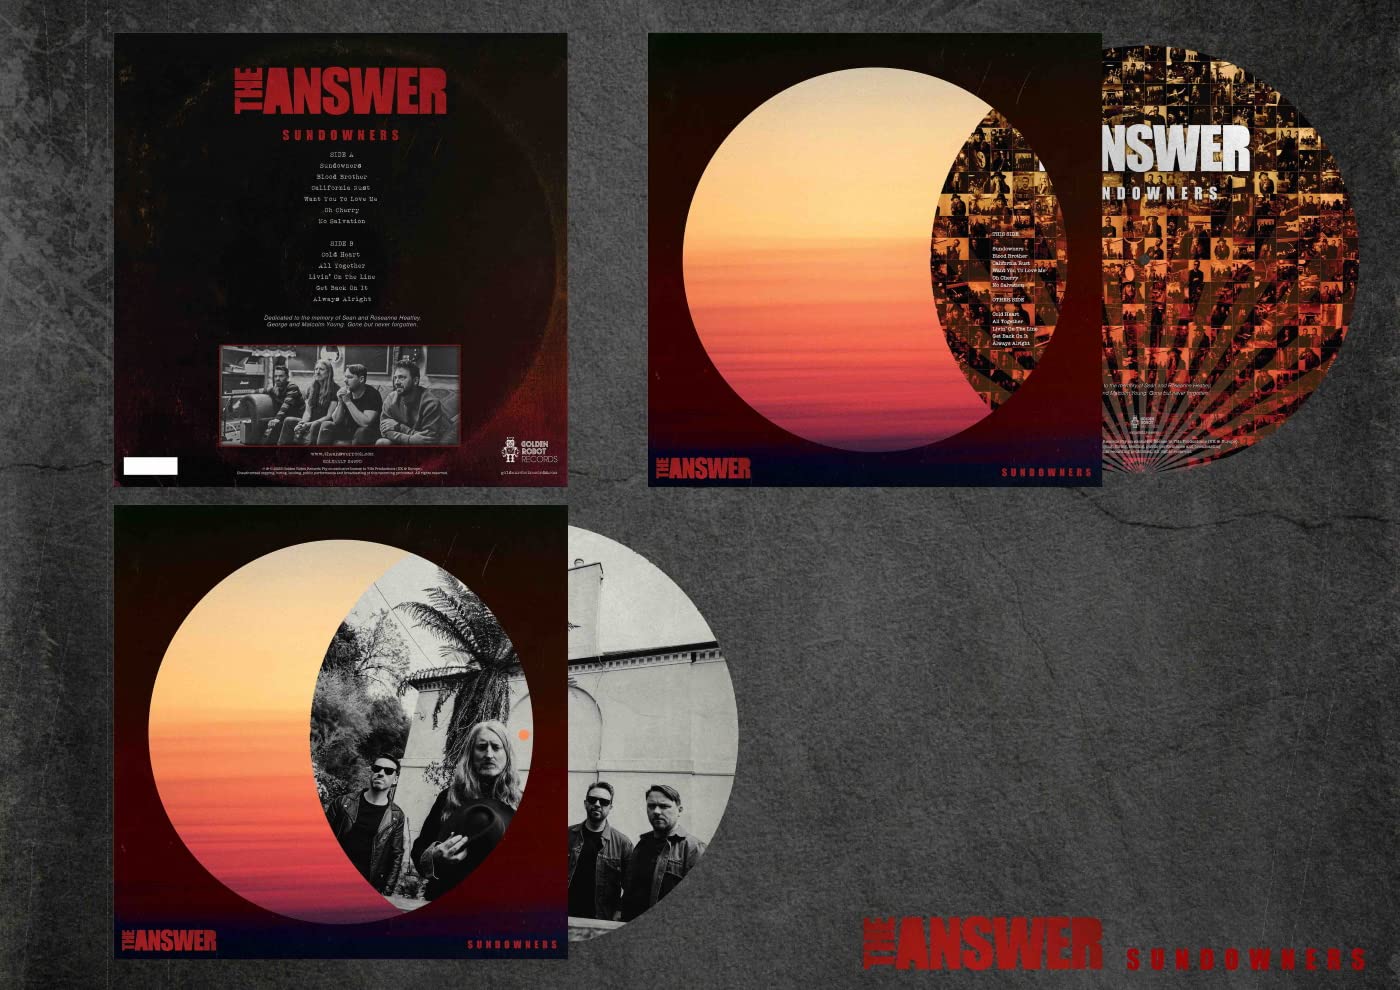 The Answer Sundowners Limited Picture Disc Vinyl LP